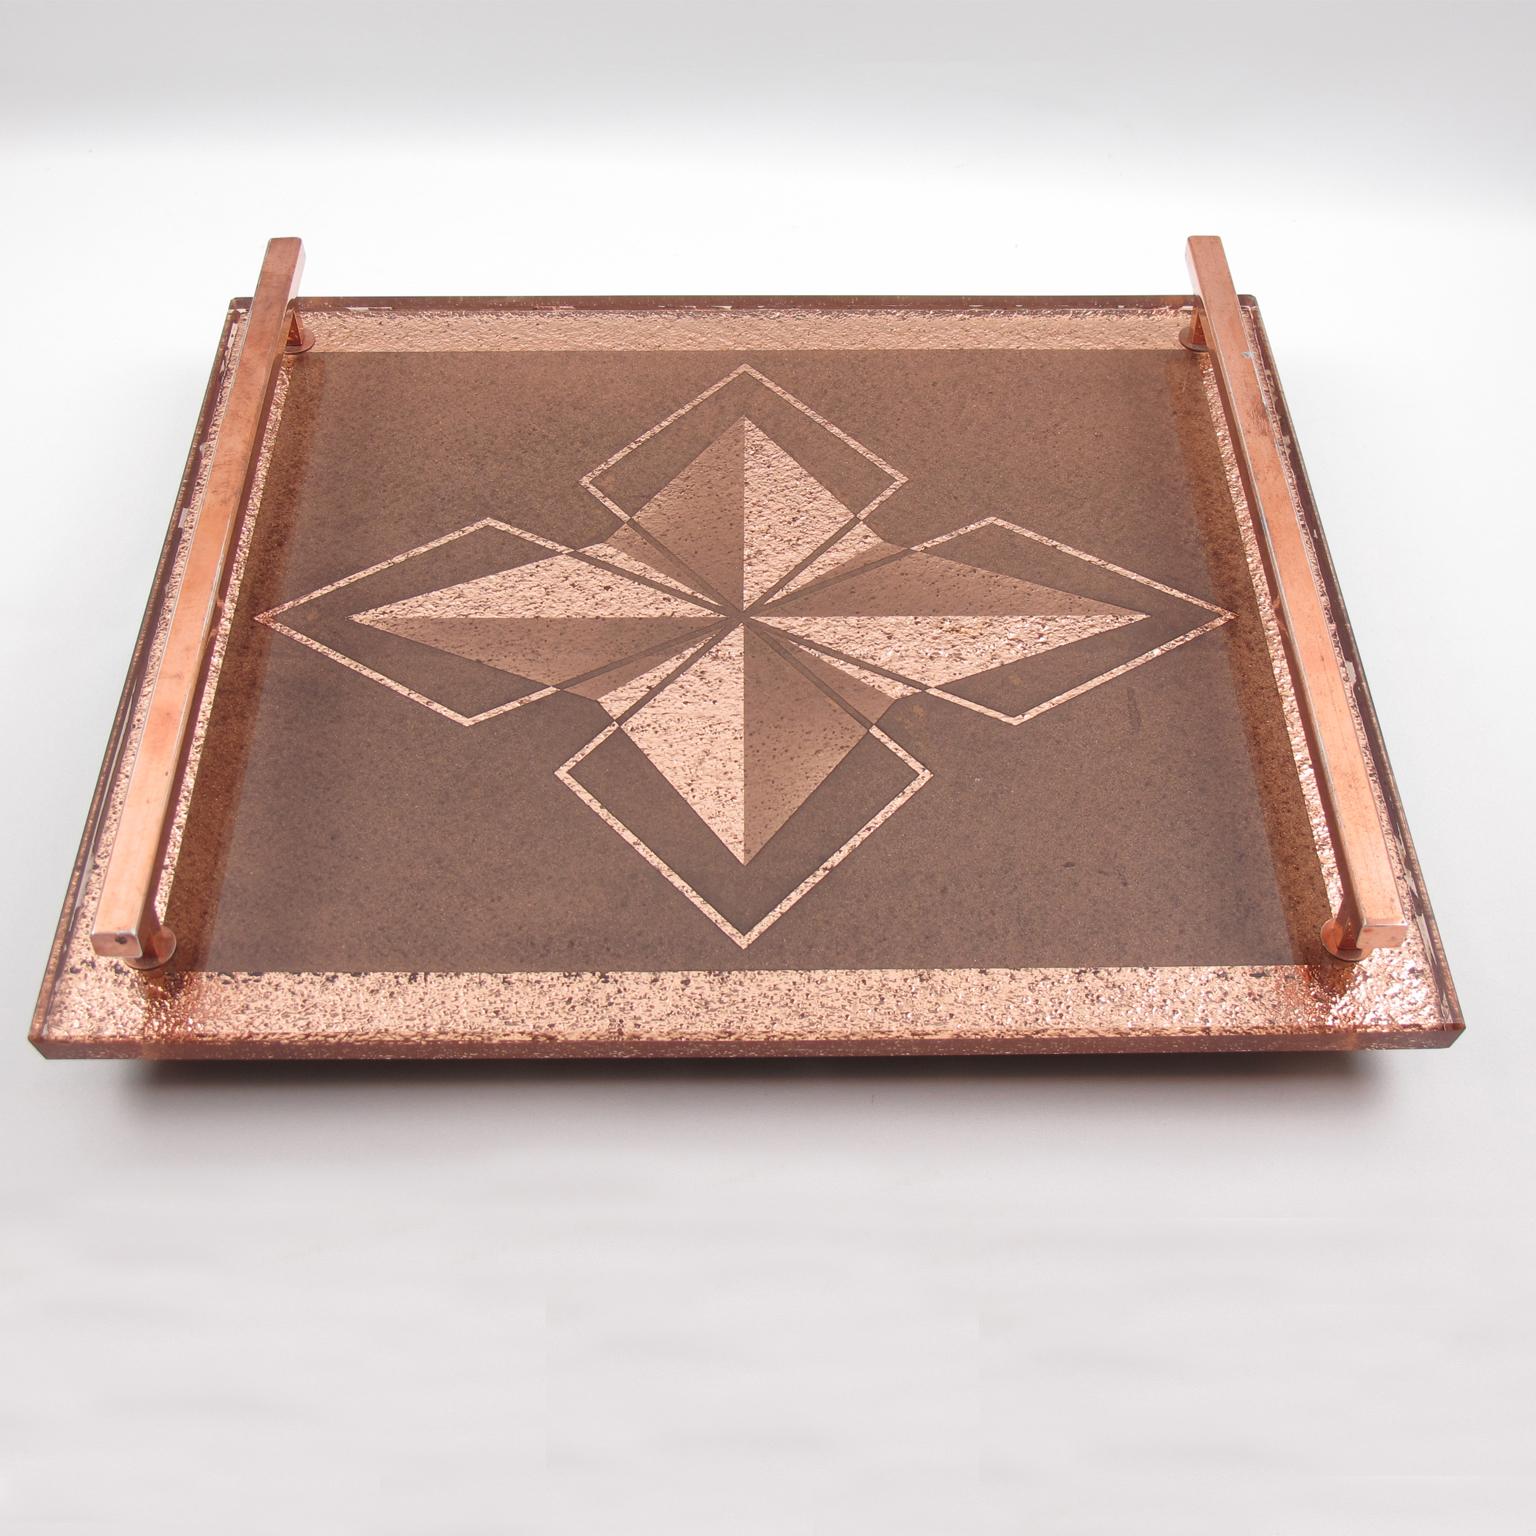 Mid-20th Century Atelier Pansart Style Art Deco Copper Mirrored Glass Serving Tray, France 1940s For Sale